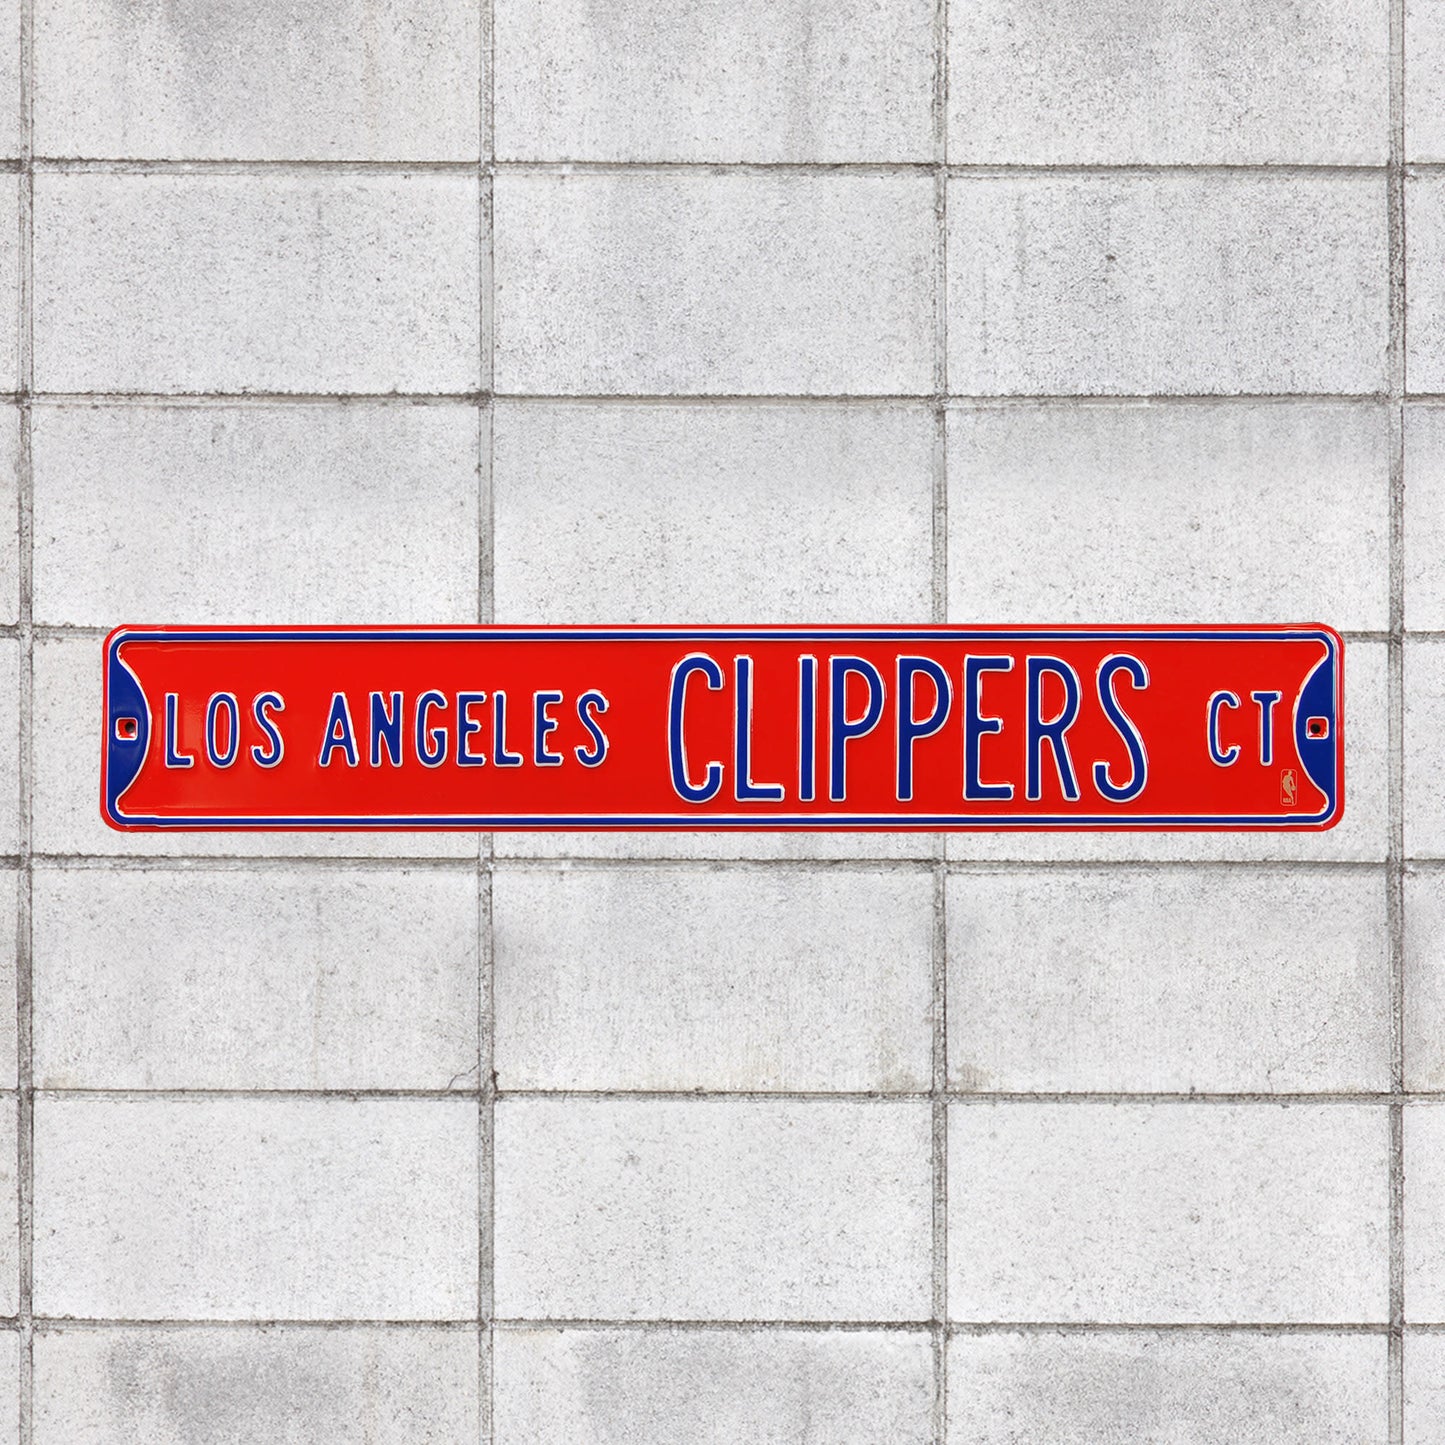 Los Angeles Clippers: Court - Officially Licensed NBA Metal Street Sign